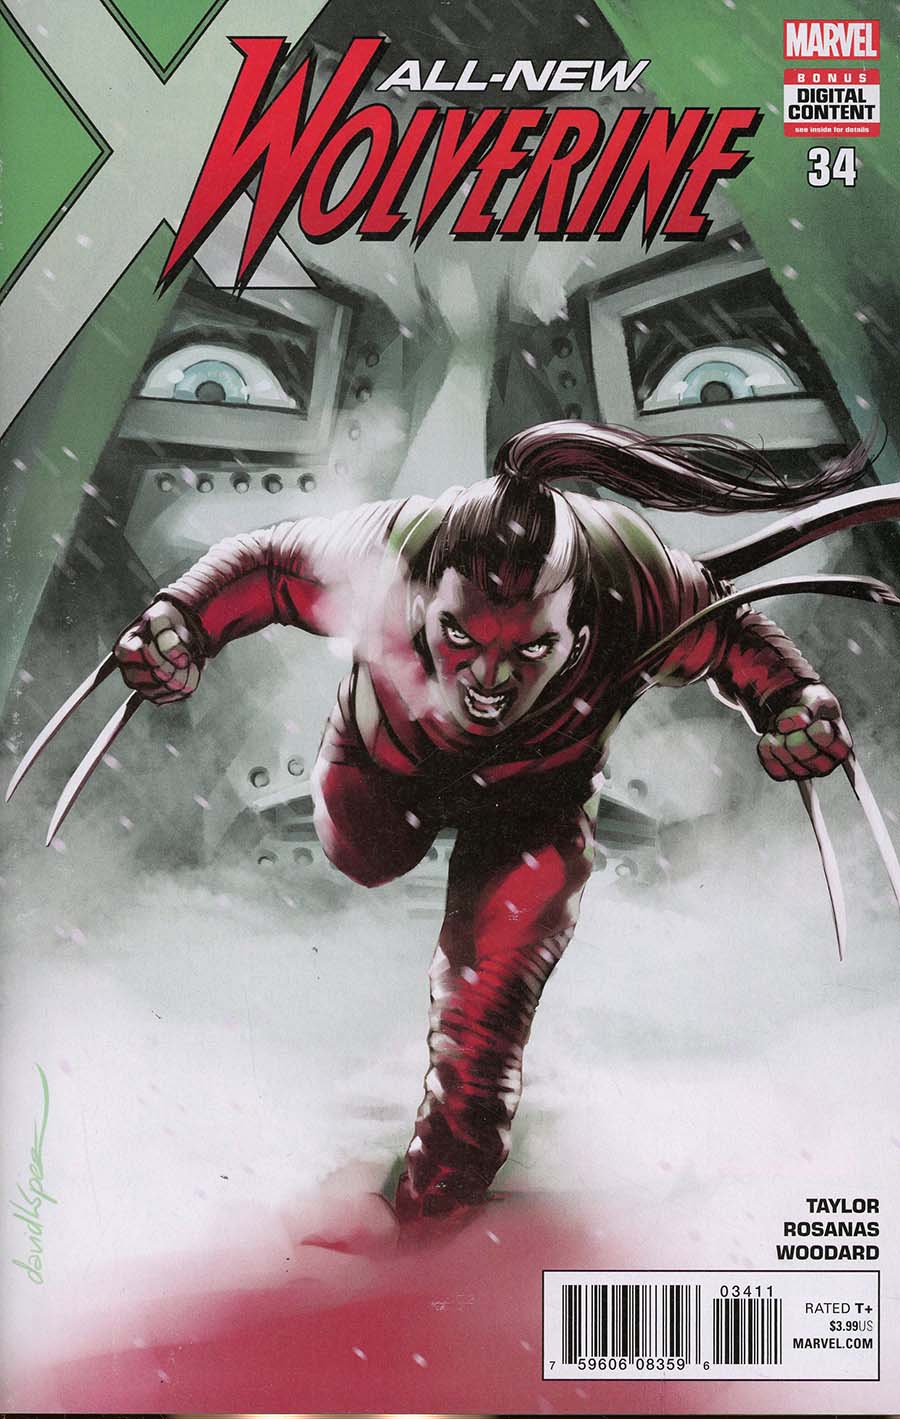 All-New Wolverine #34